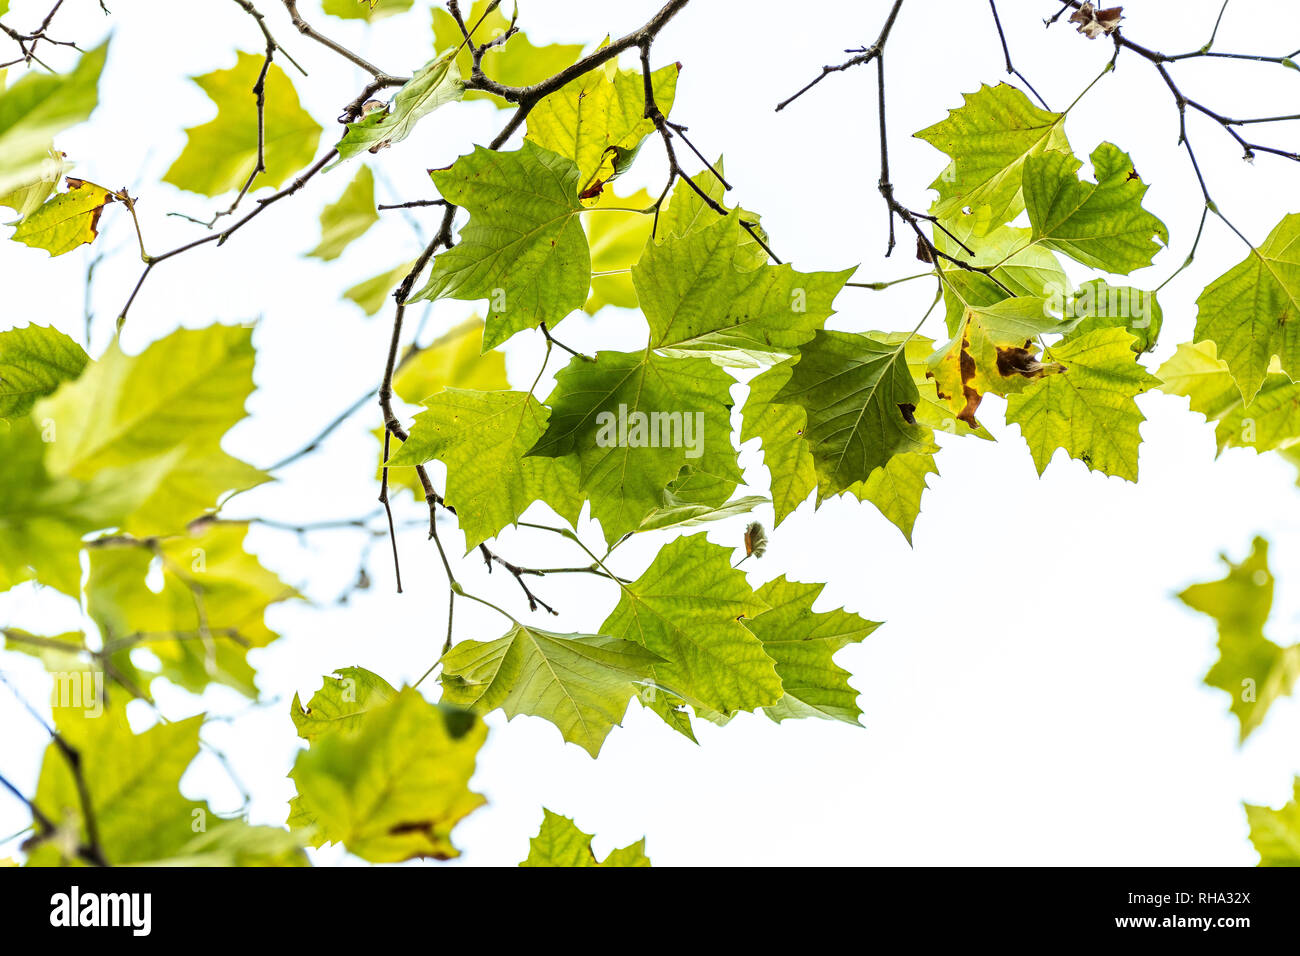 Lush green maple tree leaves, some with dark brown spots, isolated against the sky Stock Photo